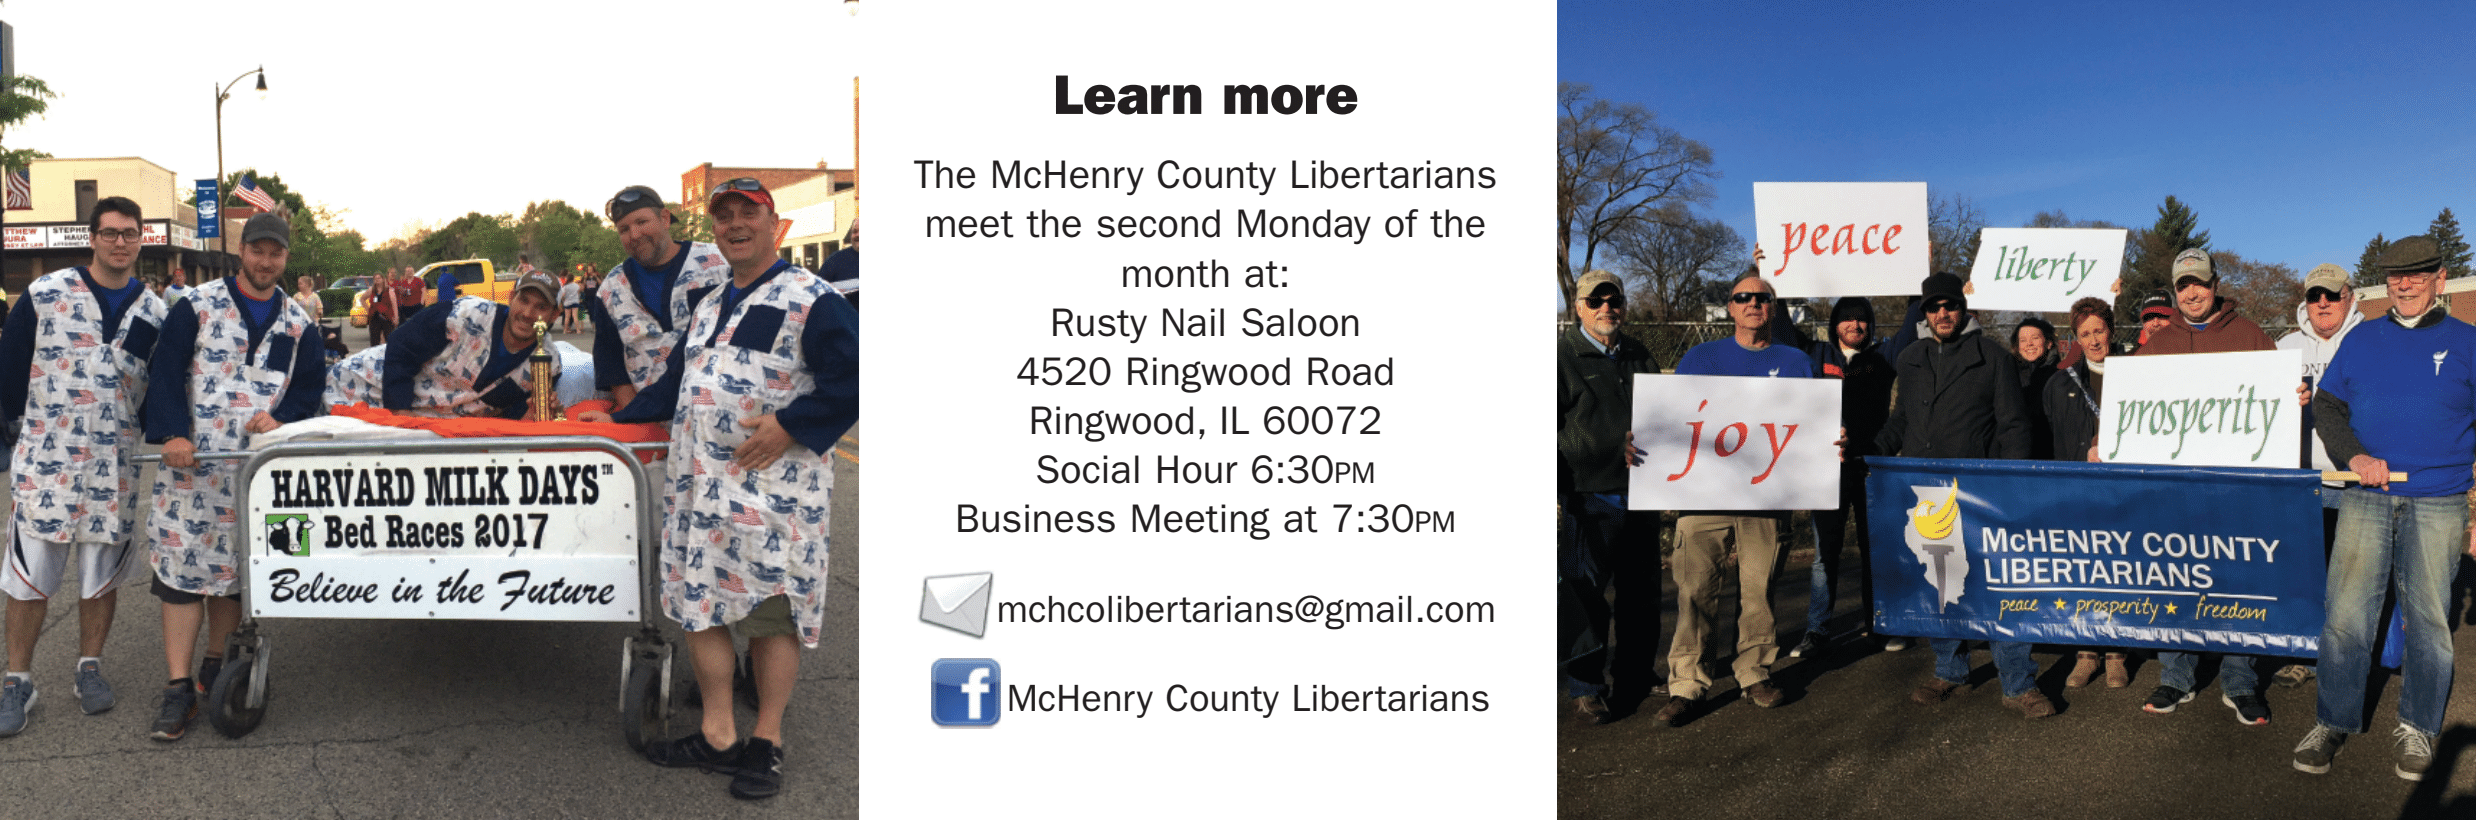 IL-McHenry-meeting-ad.png